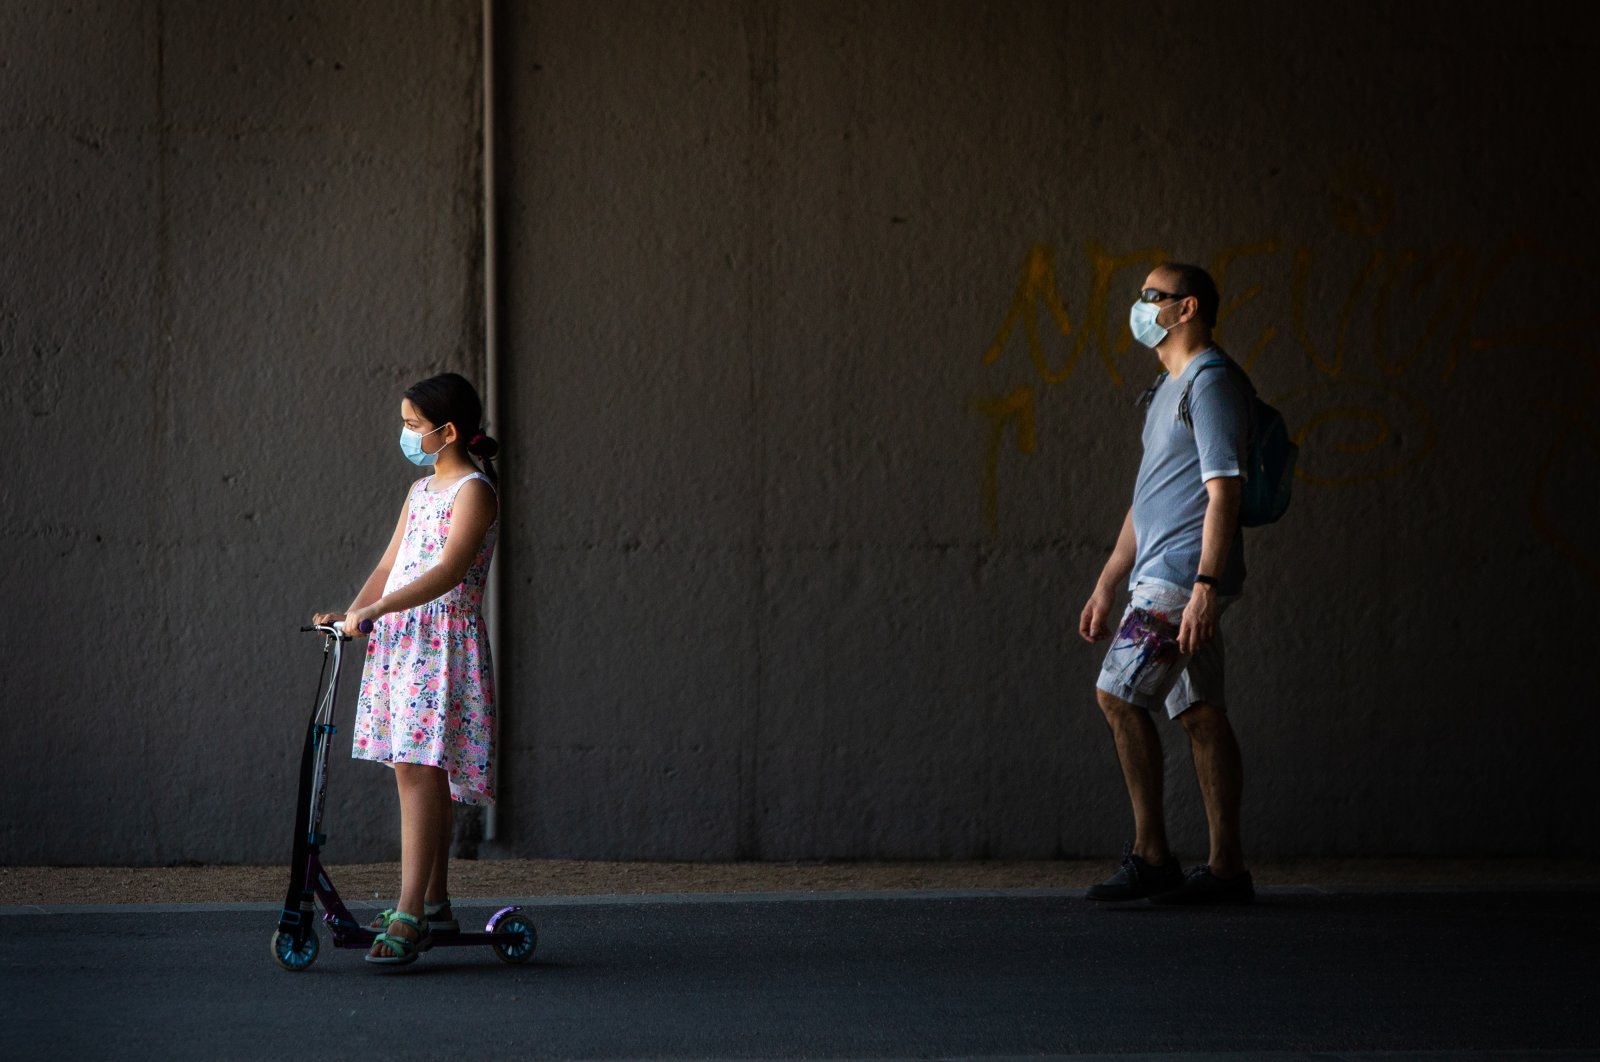 A little girl wearing a protective face mask rides an electric scooter as her father walks behind her through Madrid Rio Park amid the coronavirus outbreak, Madrid, Spain, May 25, 2020. (Photo by Getty Images)